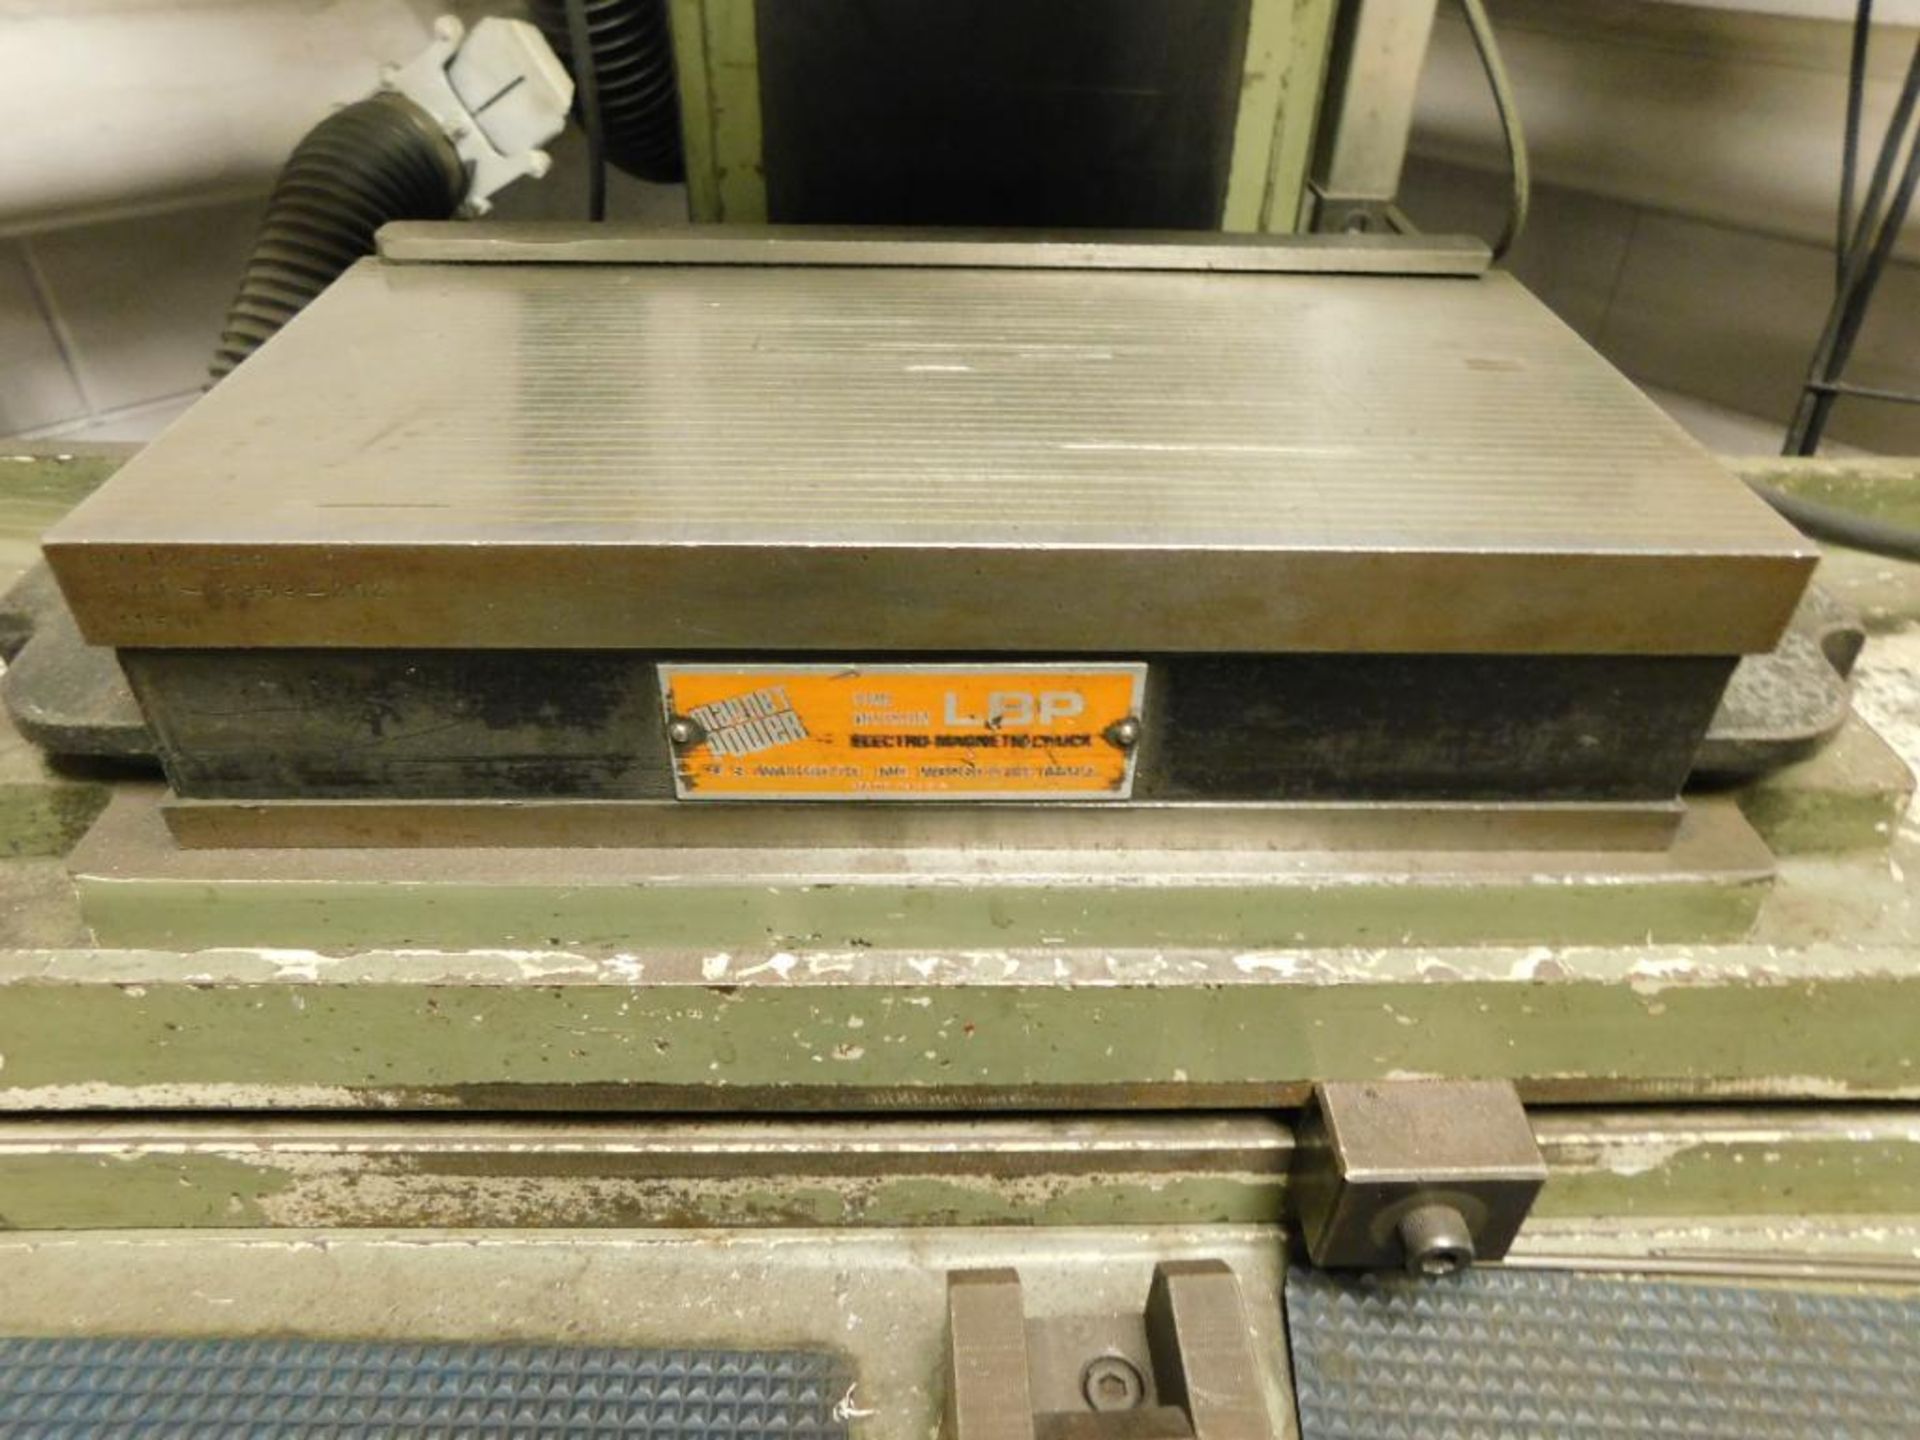 Mitsui 200 MH, Surface Grinder w/6" x 12" Electro Magnetic Chuck, Mitutoyo 2-Axis DRO, S/N 81093007 - Image 3 of 5